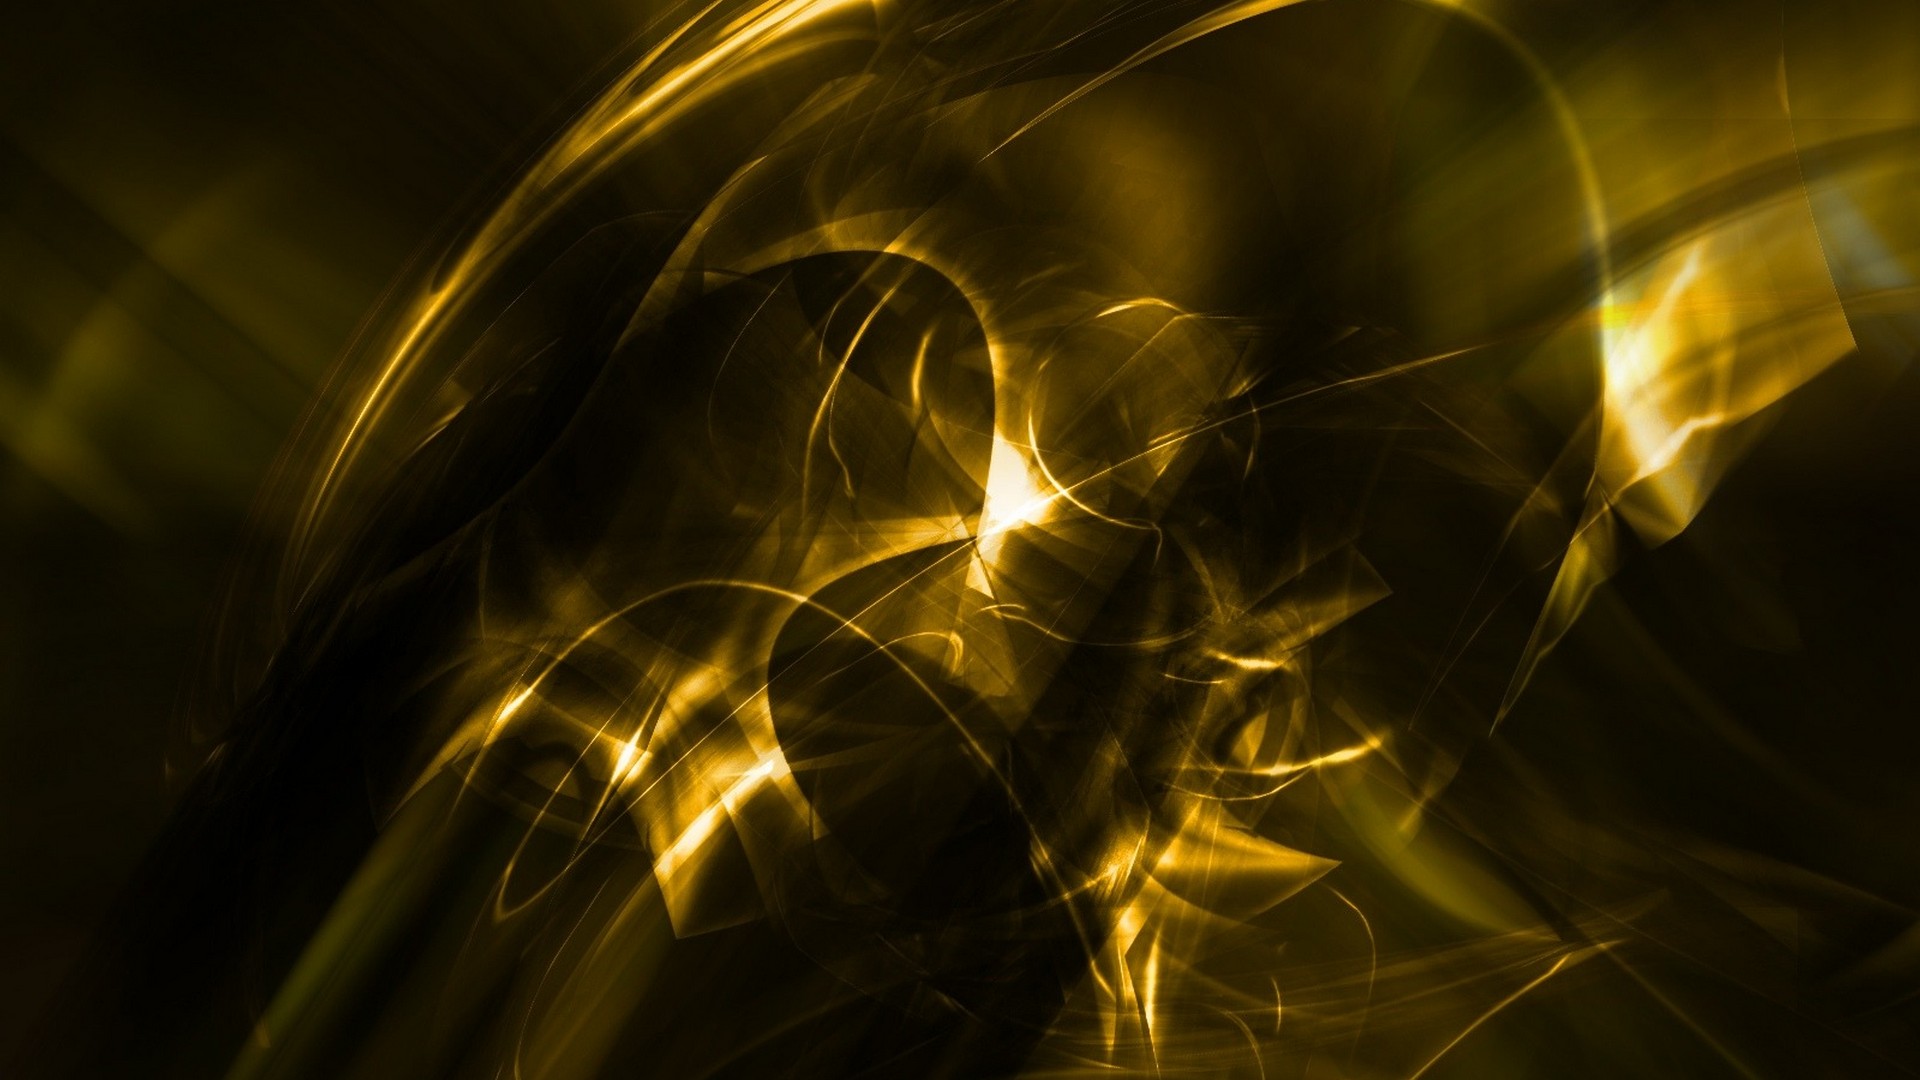 HD Black and Gold Backgrounds Resolution 1920x1080